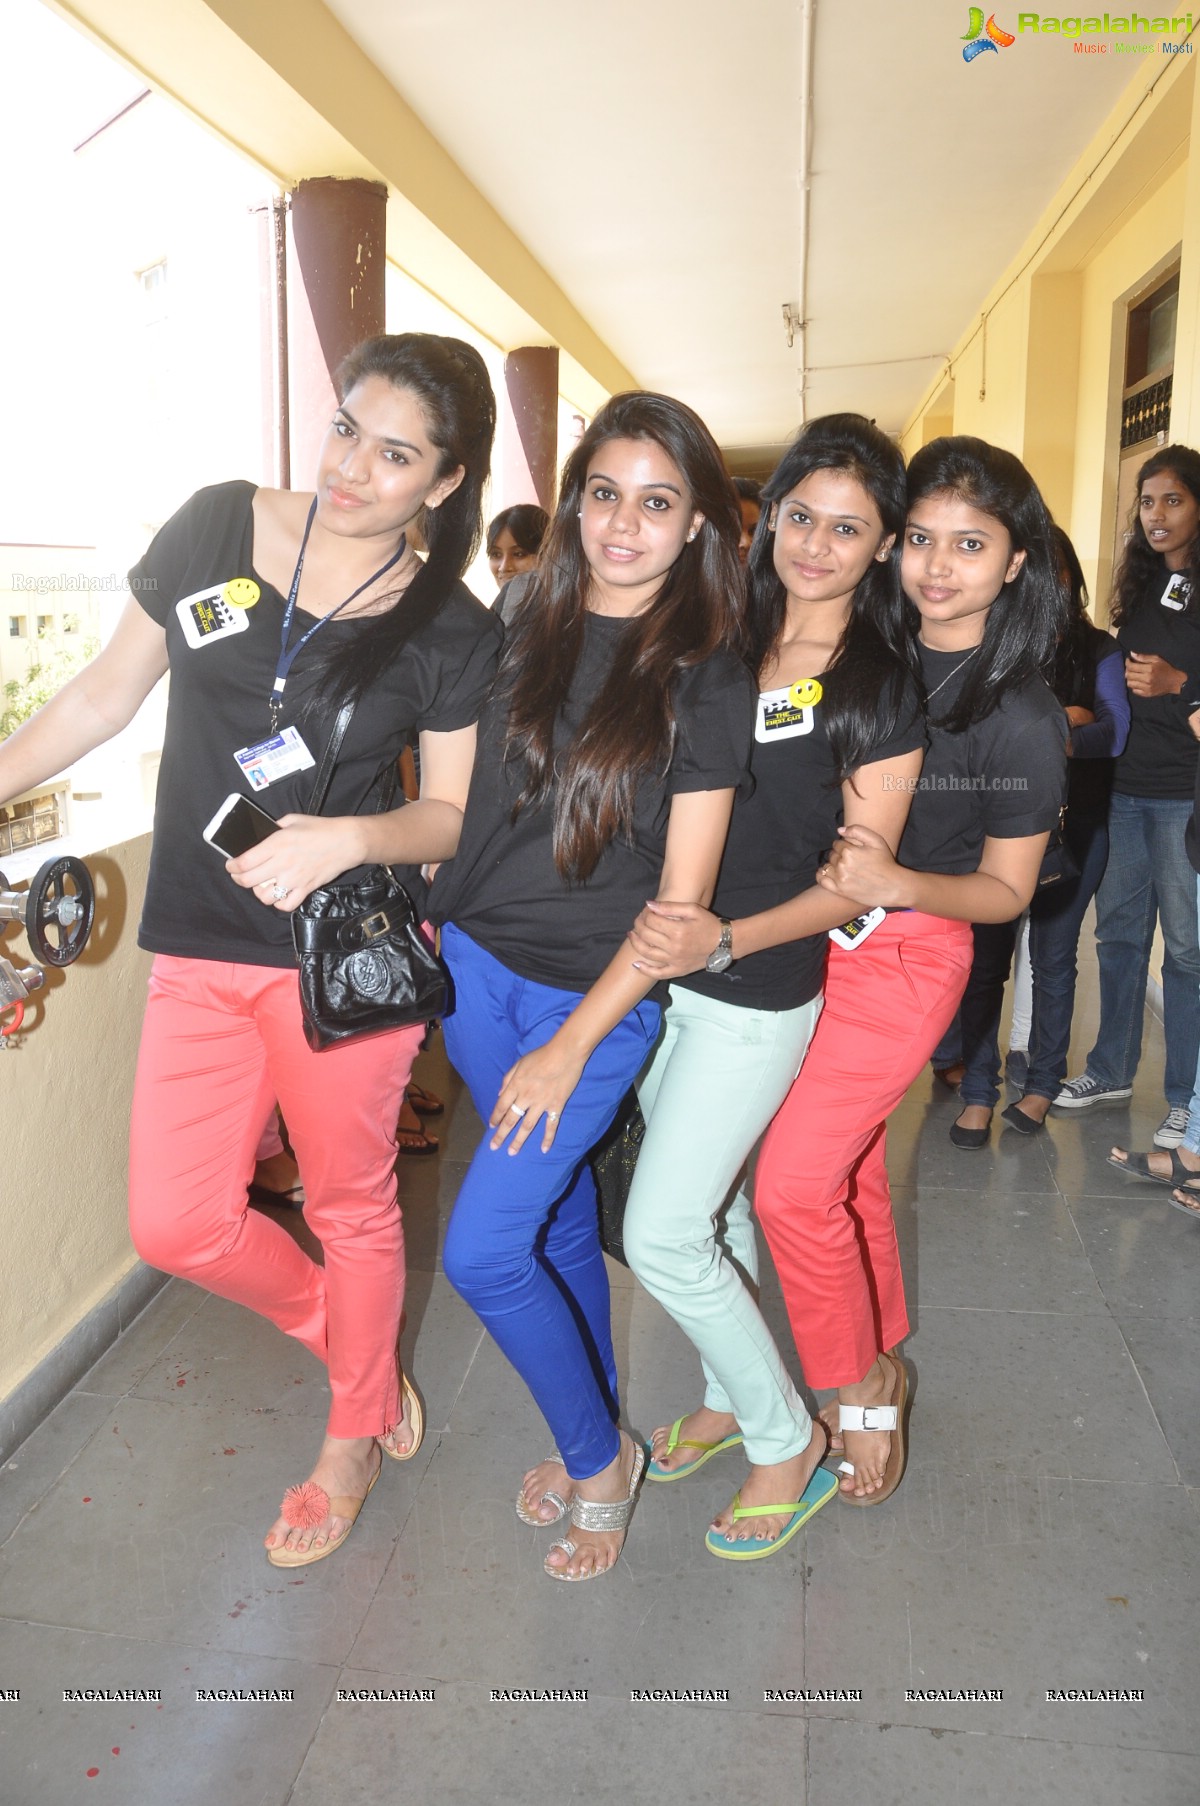 The First Cut - St. Francis Degree College for Women Film Fest 2013